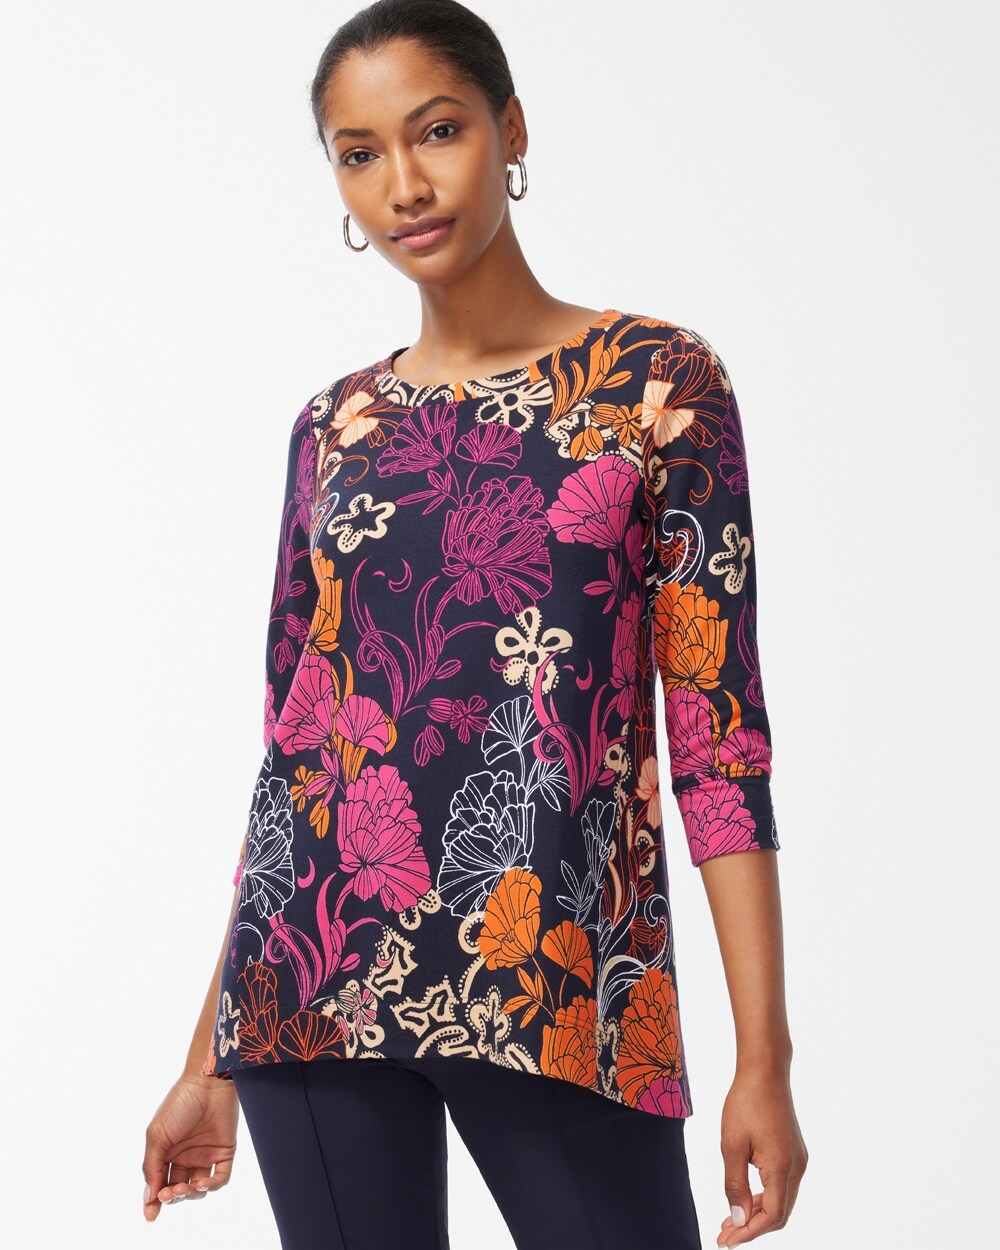 Zenergy French Terry Floral Tunic